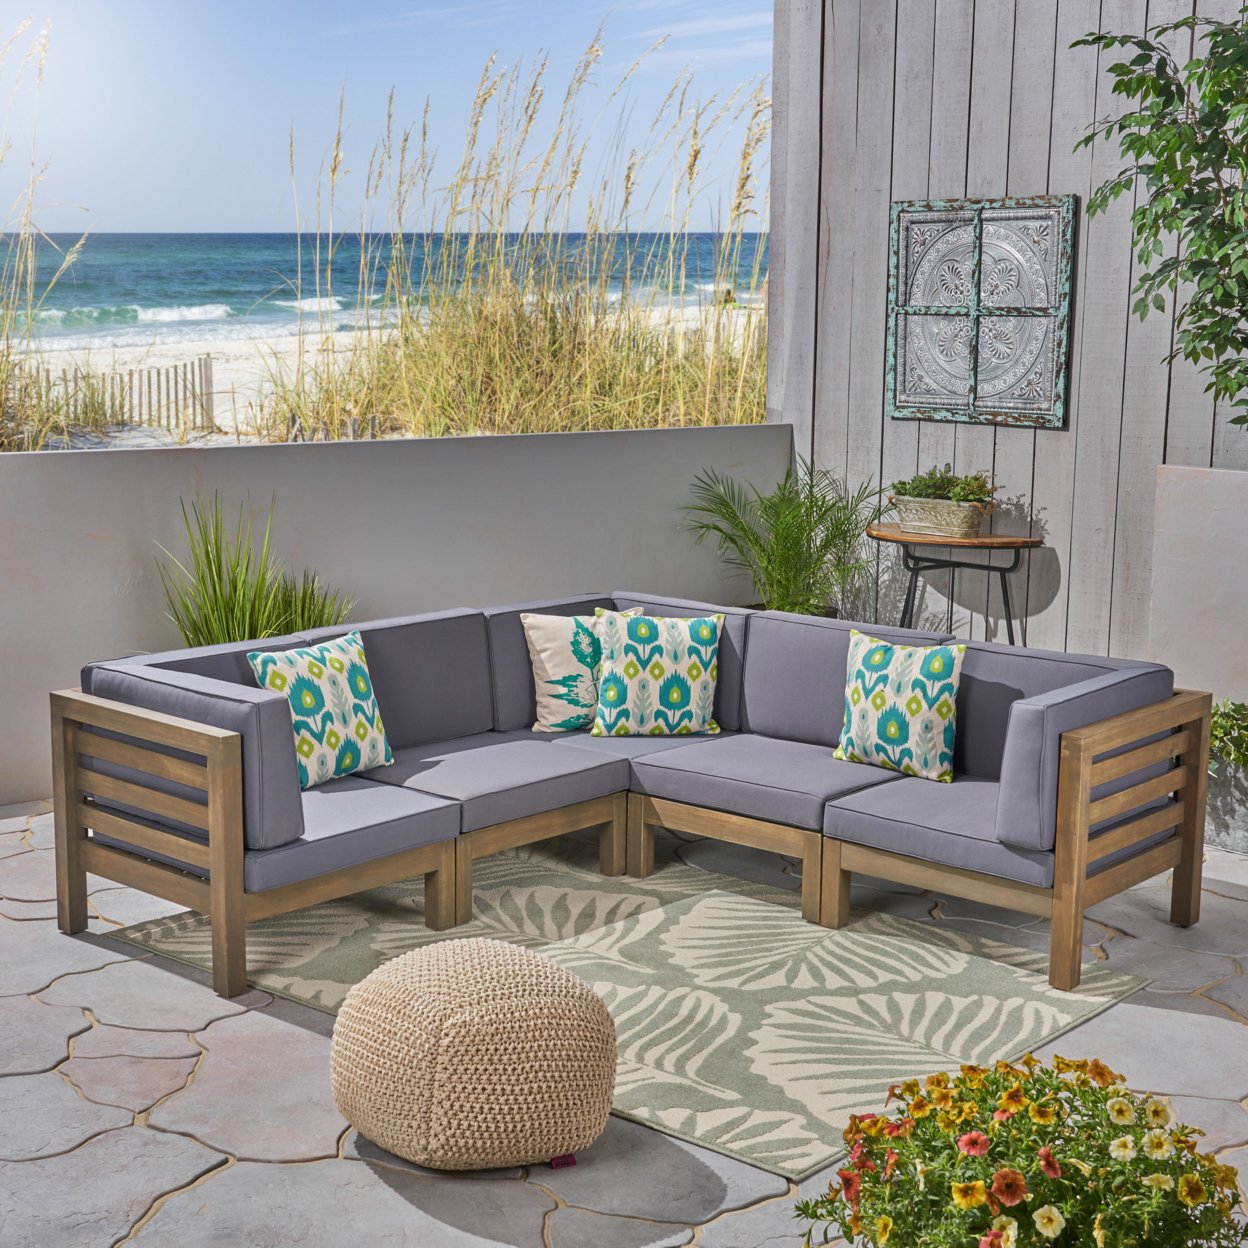 Great Deal Furniture Dawson Outdoor V-Shaped Sectional Sofa Set - 5-Seater - Acacia Wood - Outdoor Cushions - Dark Gray